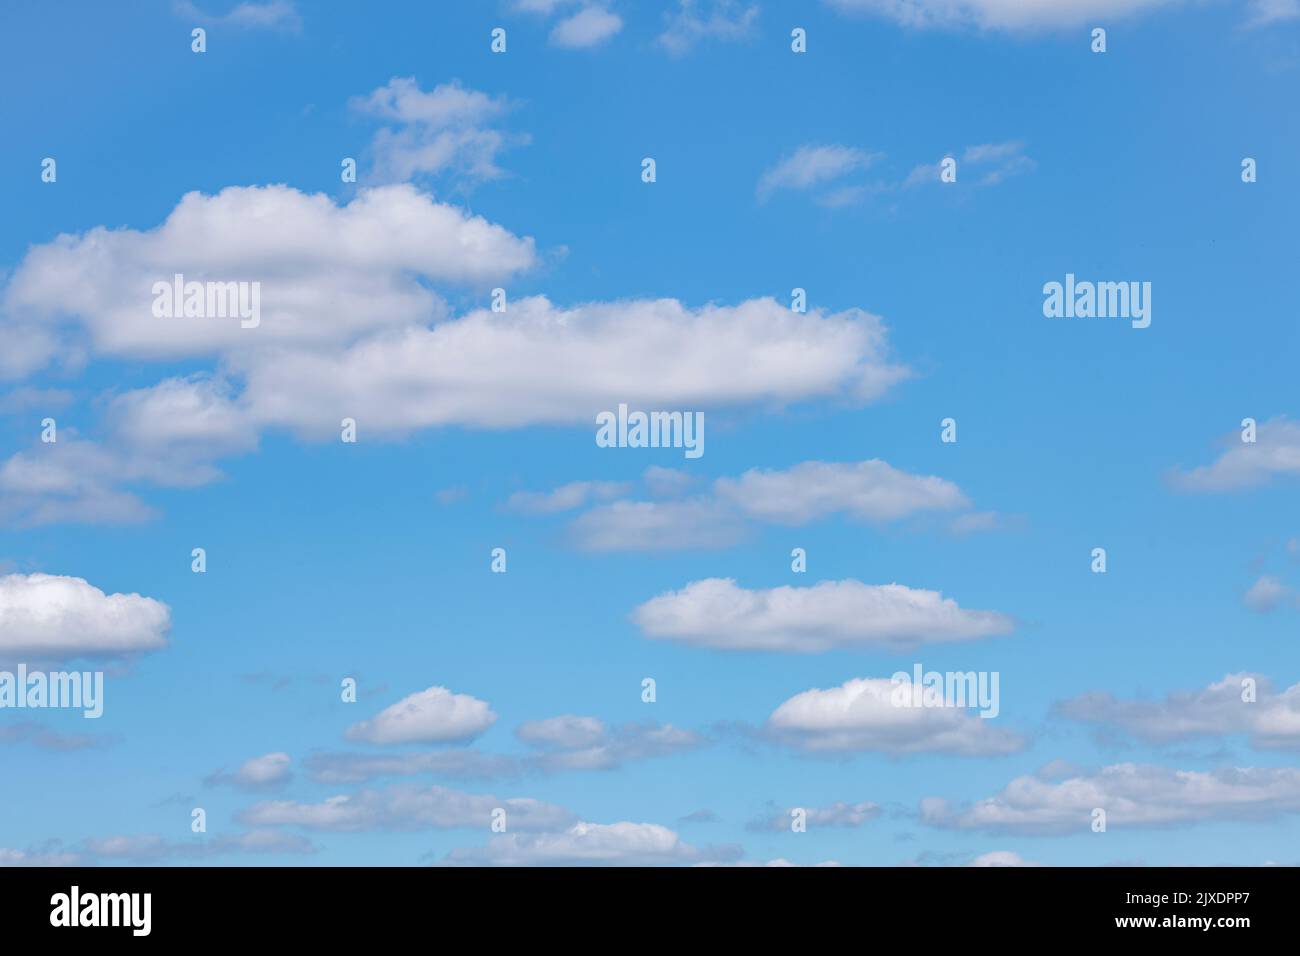 Blue sky and fluffy clouds over Cornwall. Metaphor summertime, summer vacation, summer holidays UK, cloud cover, cloud computing, cloud silver lining Stock Photo